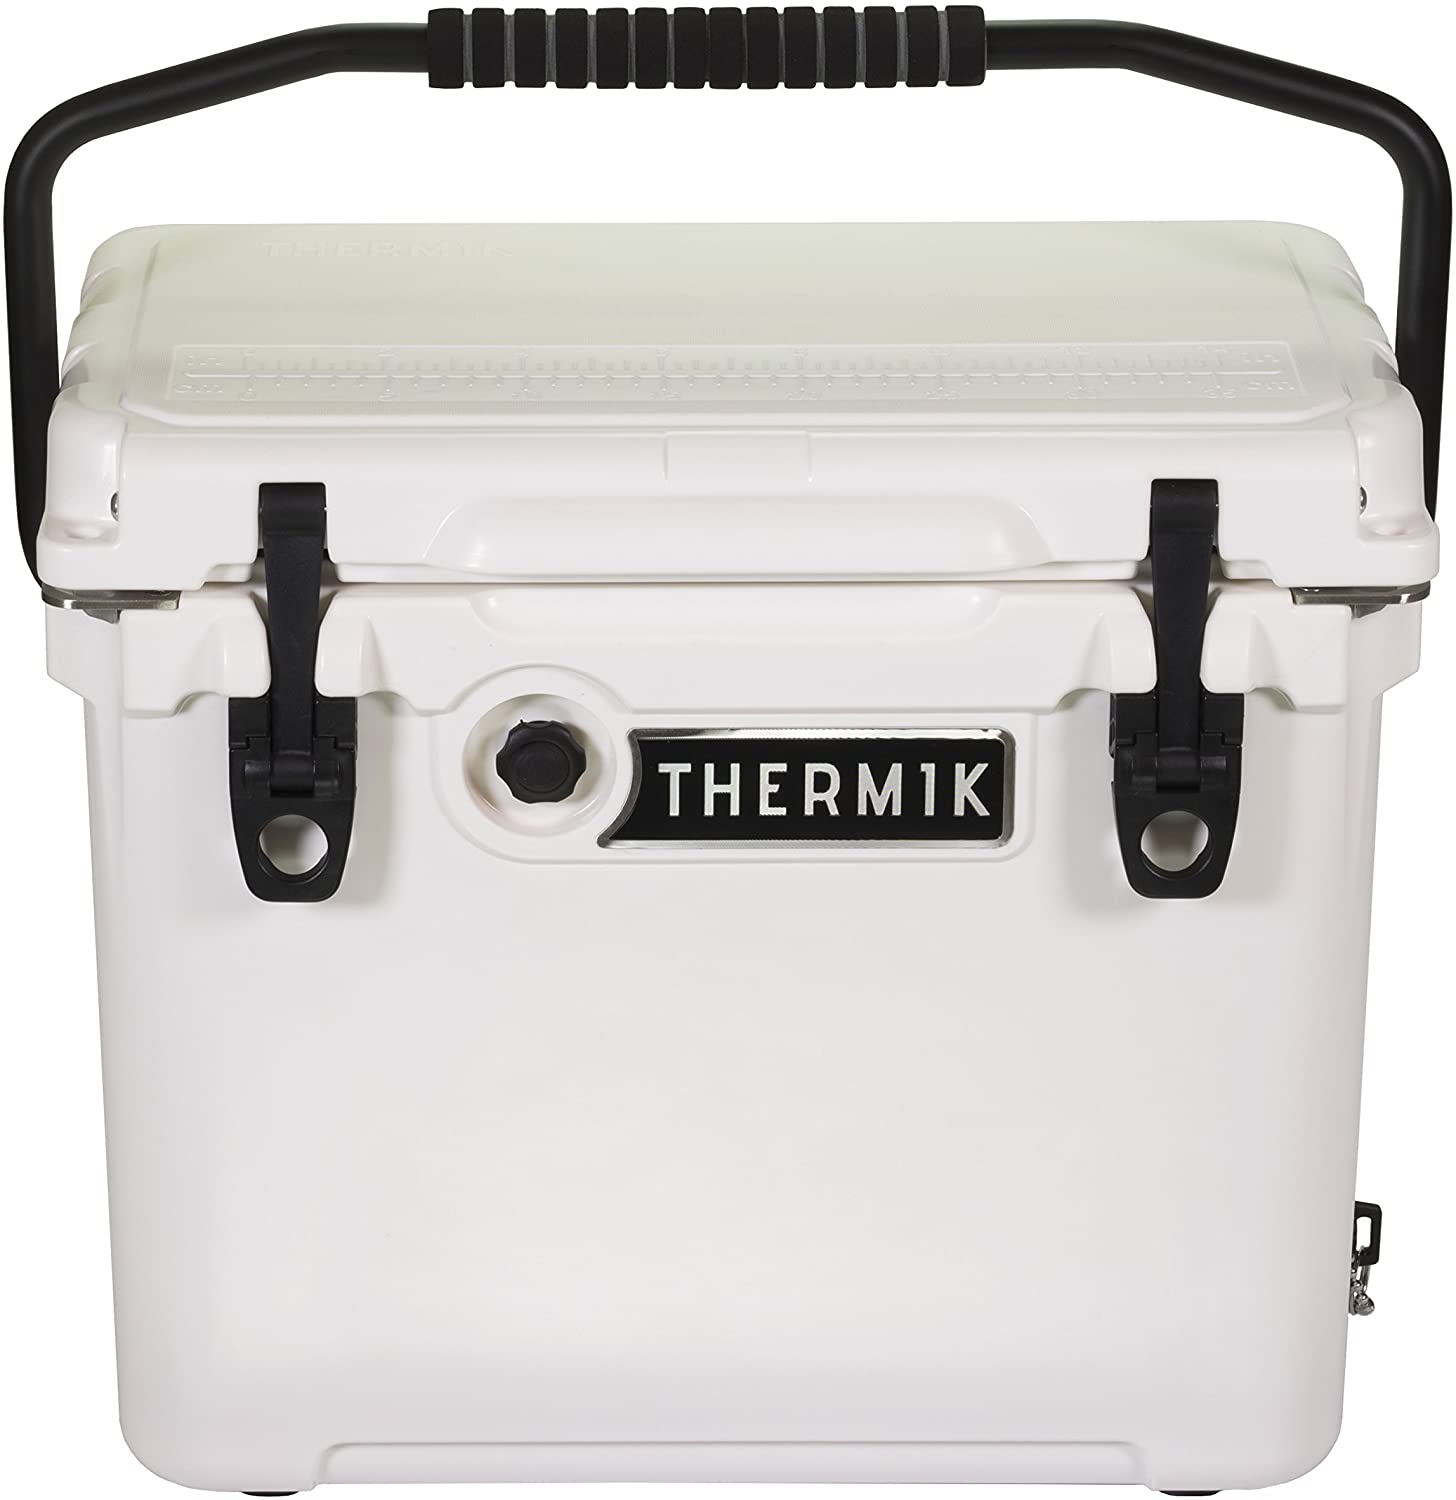 Thermik High Performance Roto-Molded Cooler,